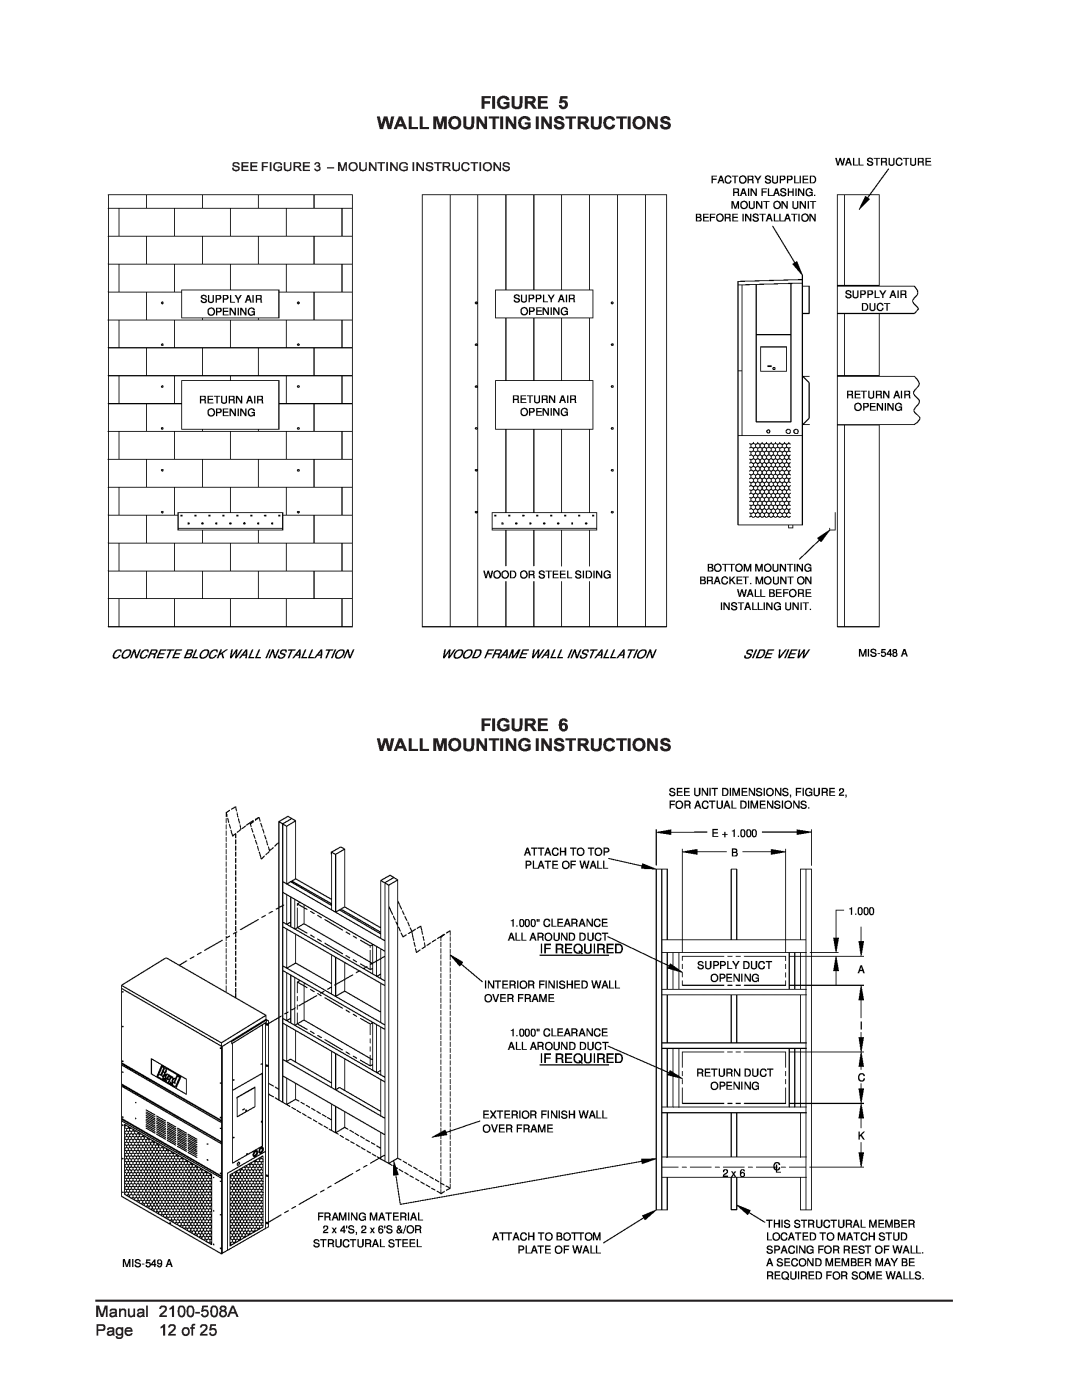 Bard 1 W48A1, W42L, W70L1 Figure Wall Mounting Instructions, Manual, 2100-508A, Page, 12 of, Wood Frame Wall Installation 